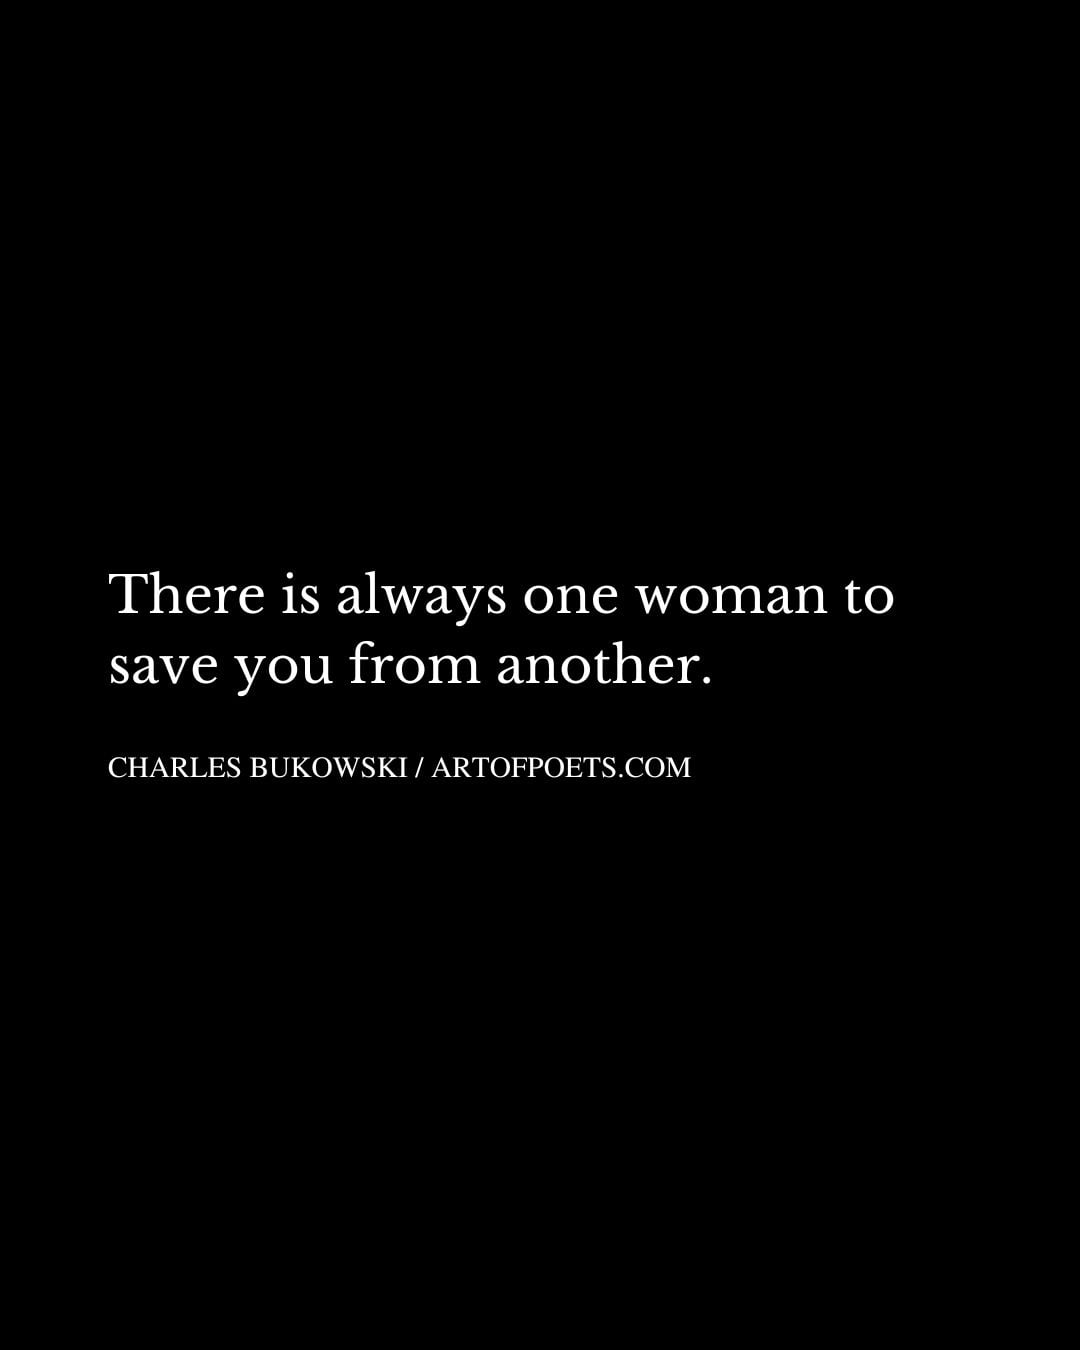 There is always one woman to save you from another 1